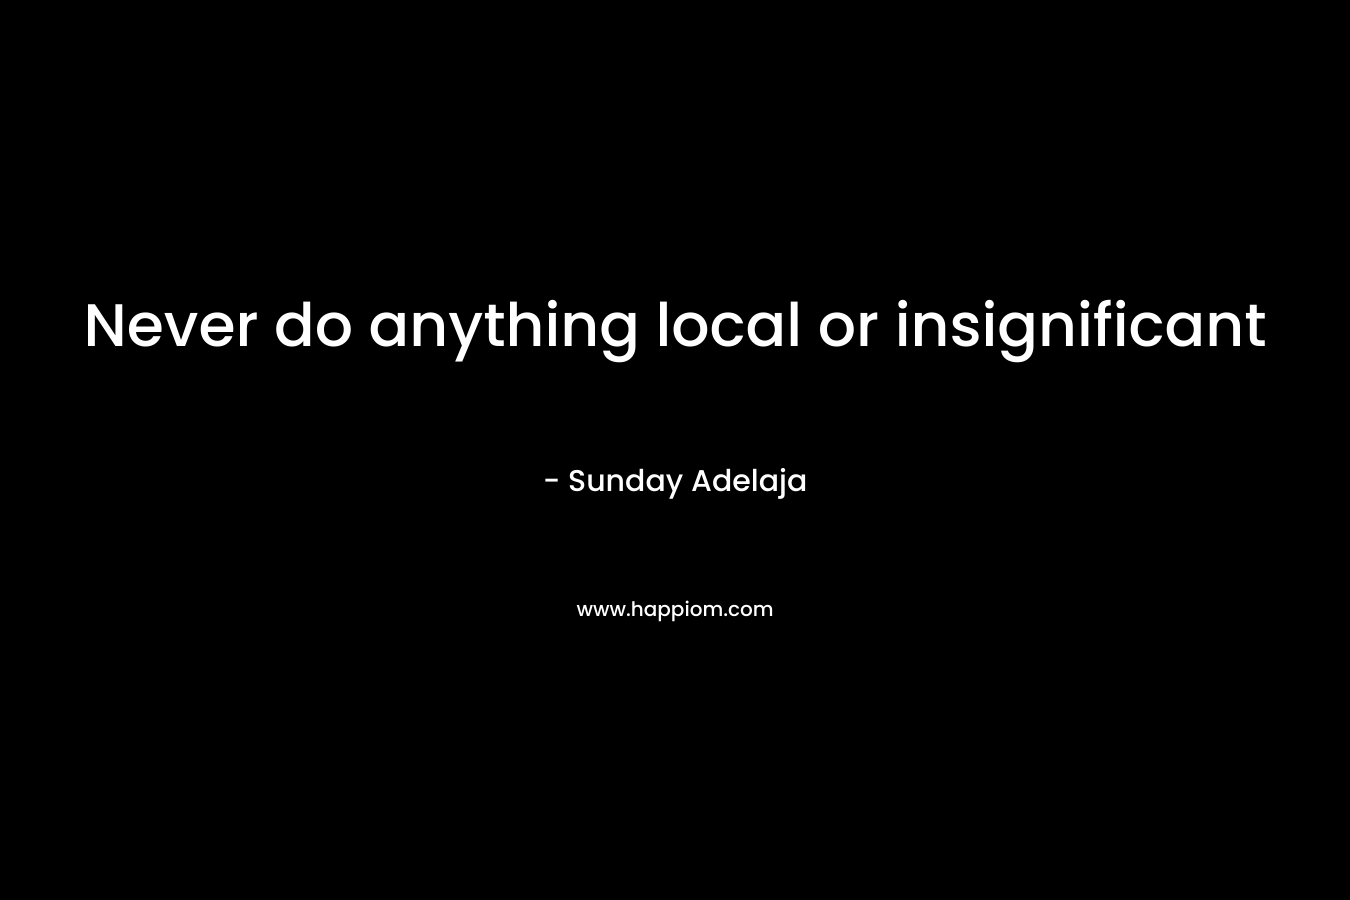 Never do anything local or insignificant